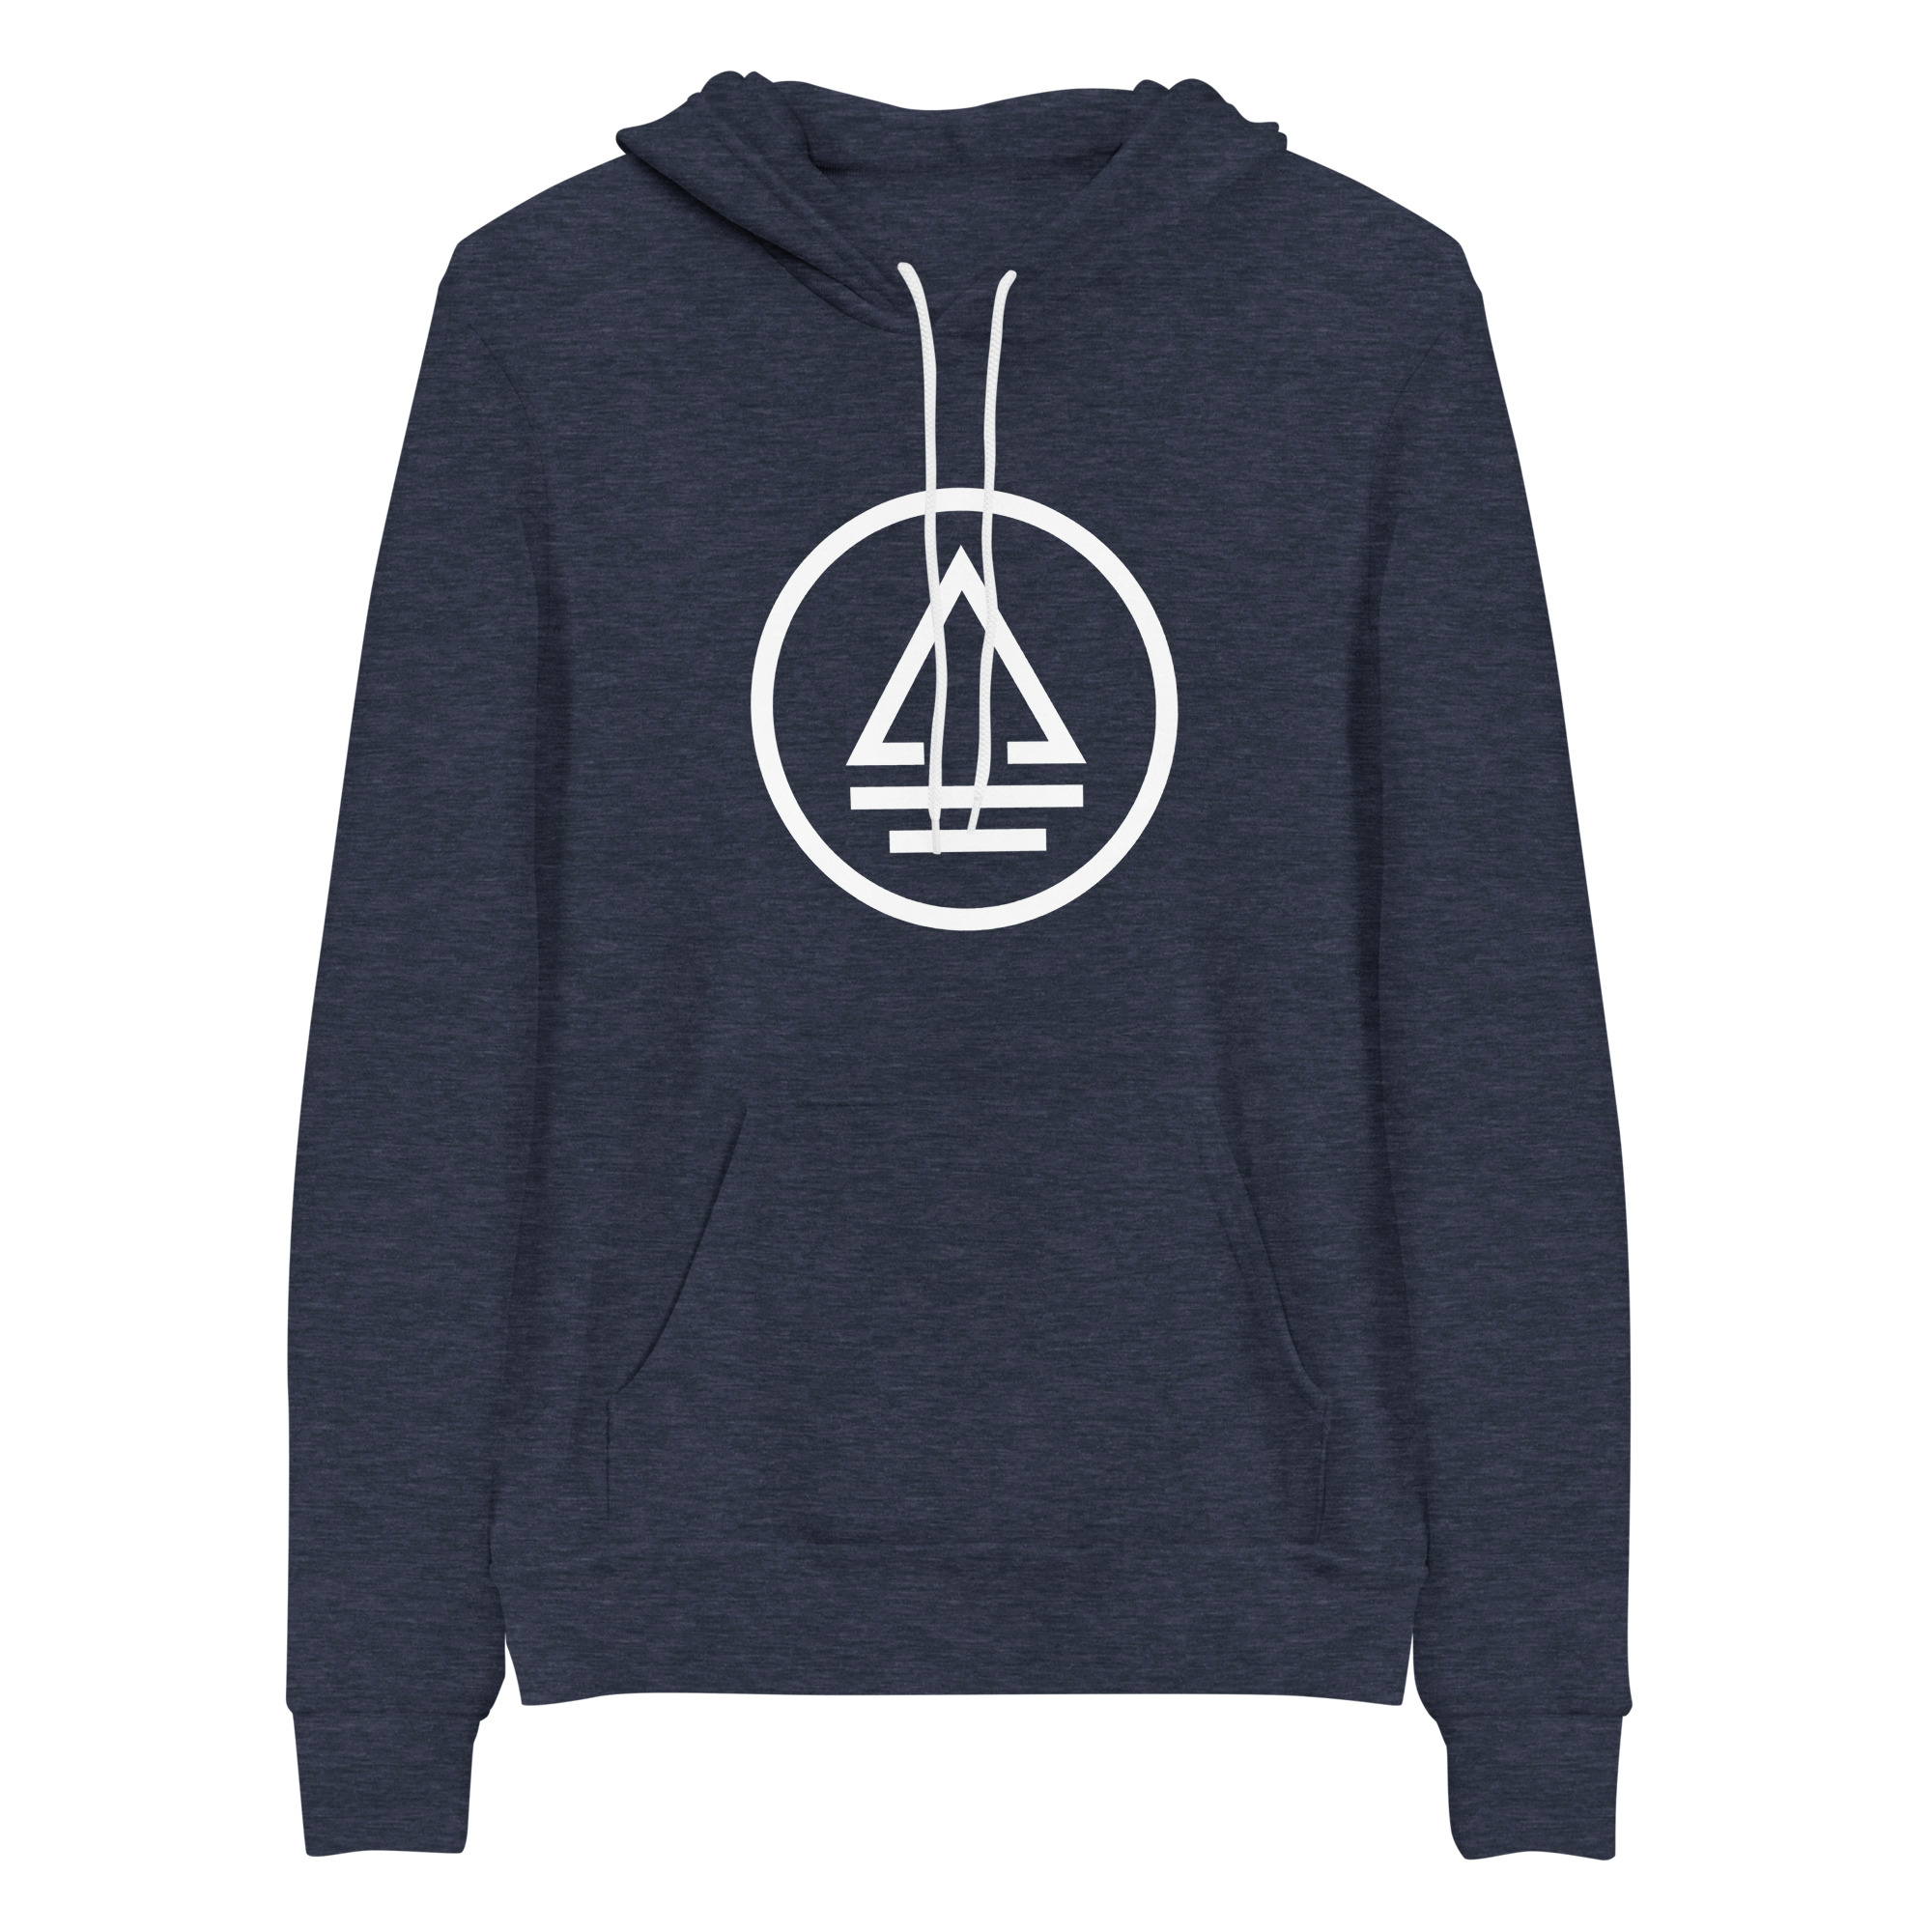 unisex-pullover-hoodie-heather-navy-front-64bacb7cc3444.jpg